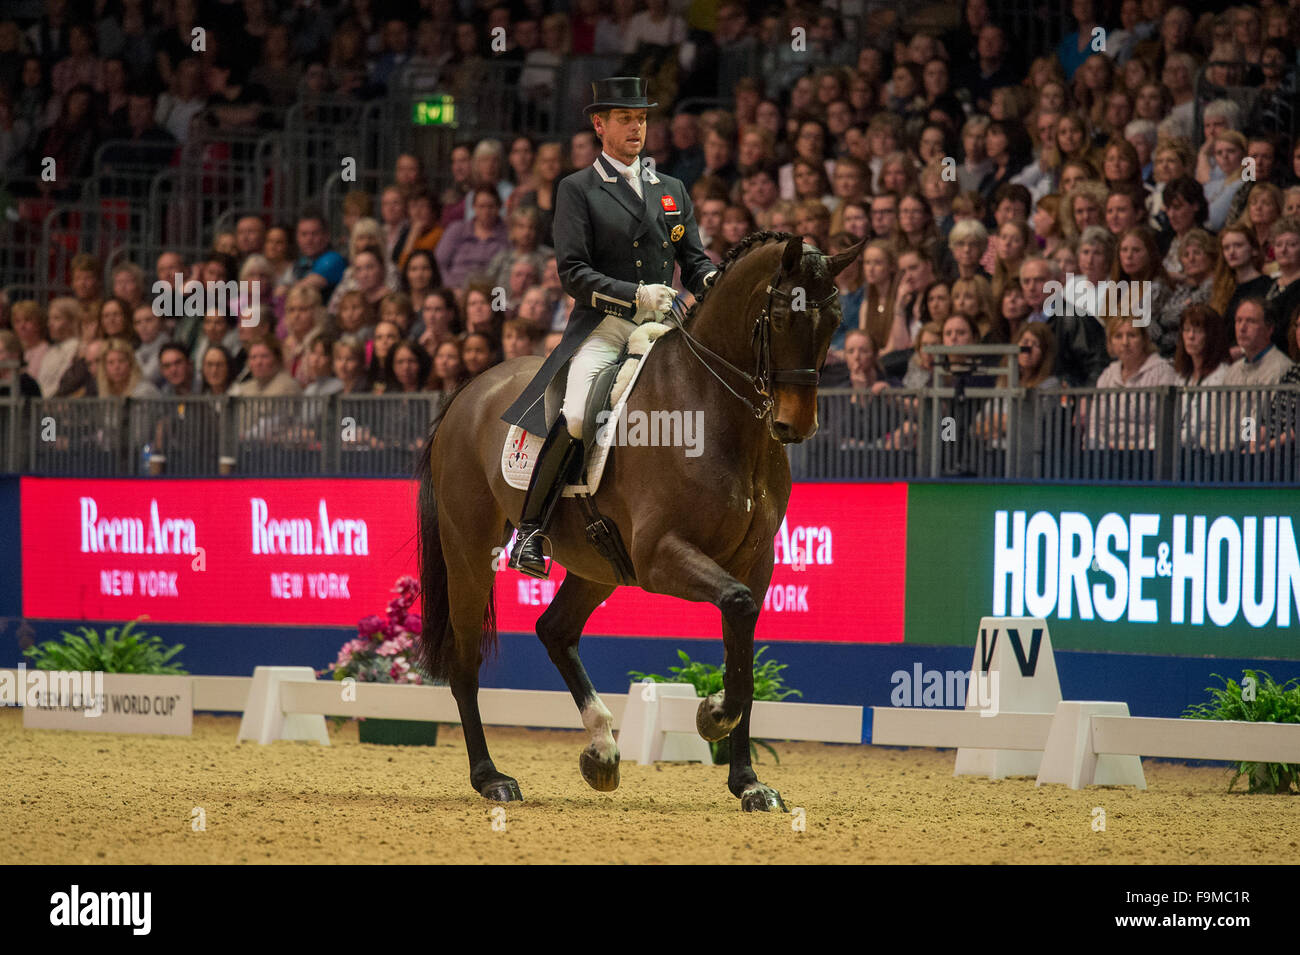 London, UK. 16th Dec, 2015. Carl Hester of Britain competes during the sixth leg of the Reem Acra FEI World Cup Dressage Western European League at Olympia in London, Britain on Dec. 16, 2015. Carl Hester claimed the title with 83.750 points. © FEI/Jon Stroud Media/Xinhua/Alamy Live News Stock Photo